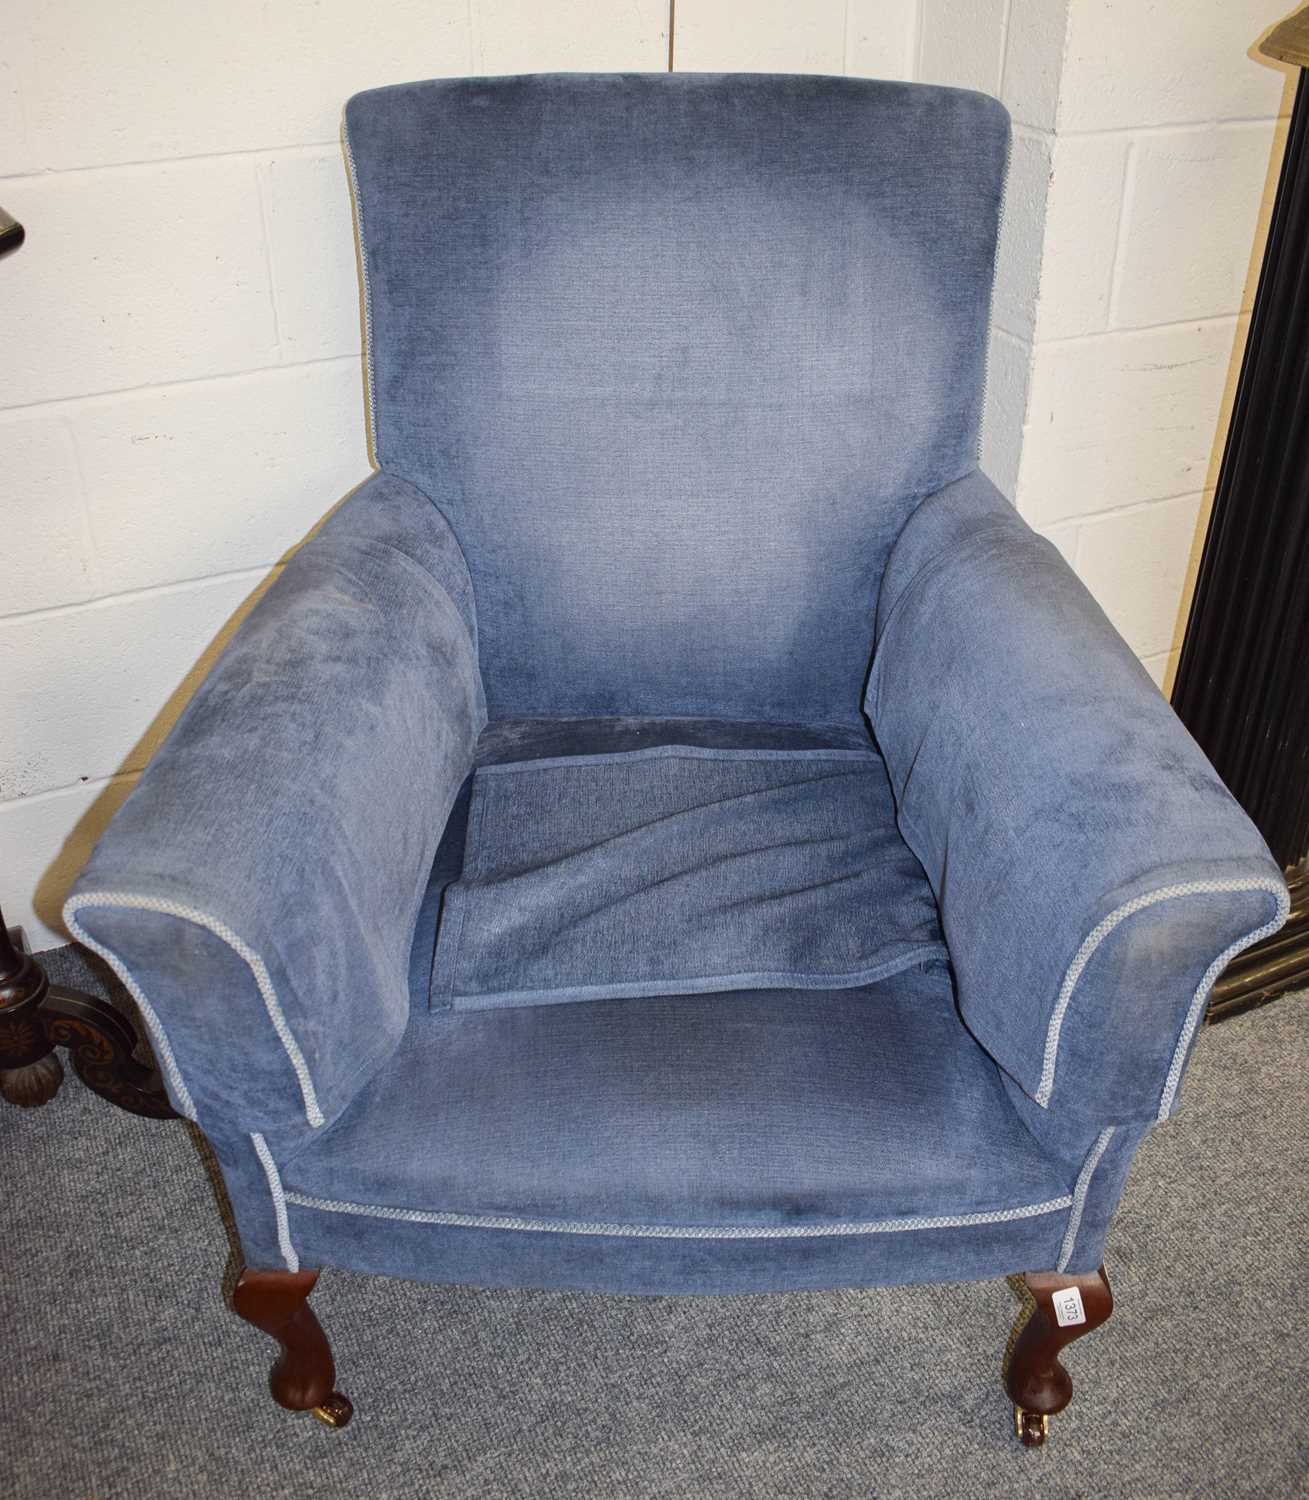 A Mahogany Framed Blue Upholstered Armchair, with cabriole legs moving on castors.